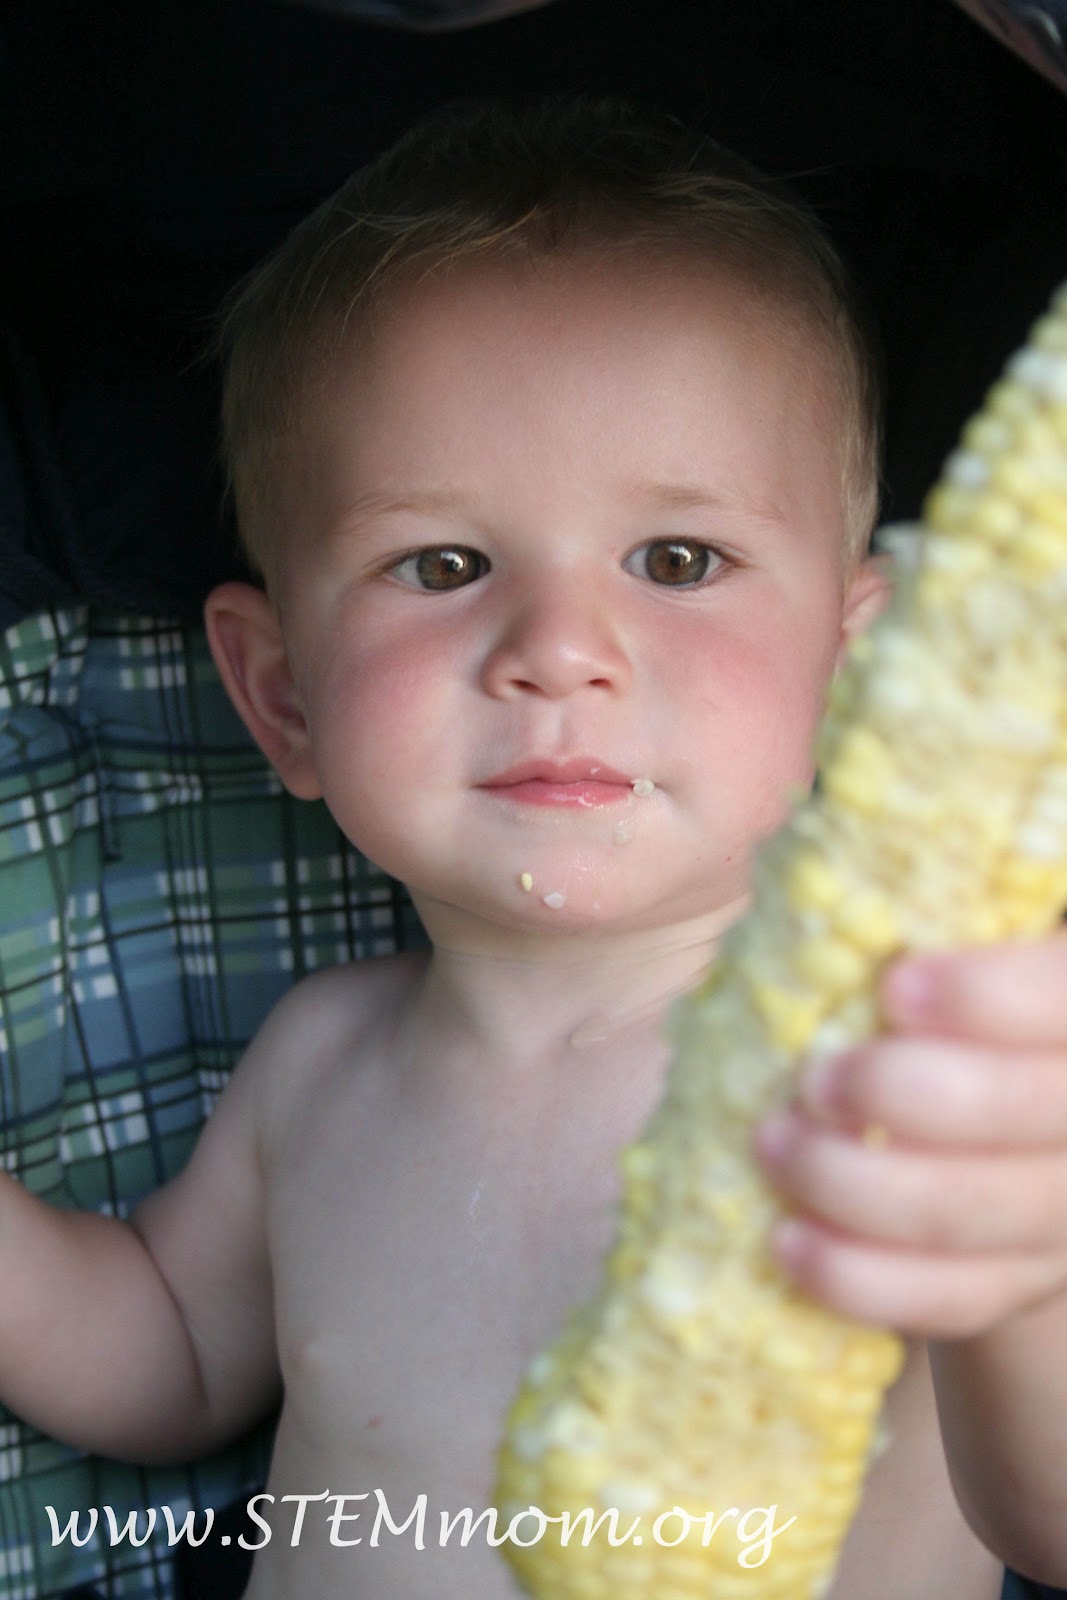 Dr. STEM Mom: Our Illinois Corn in Early July